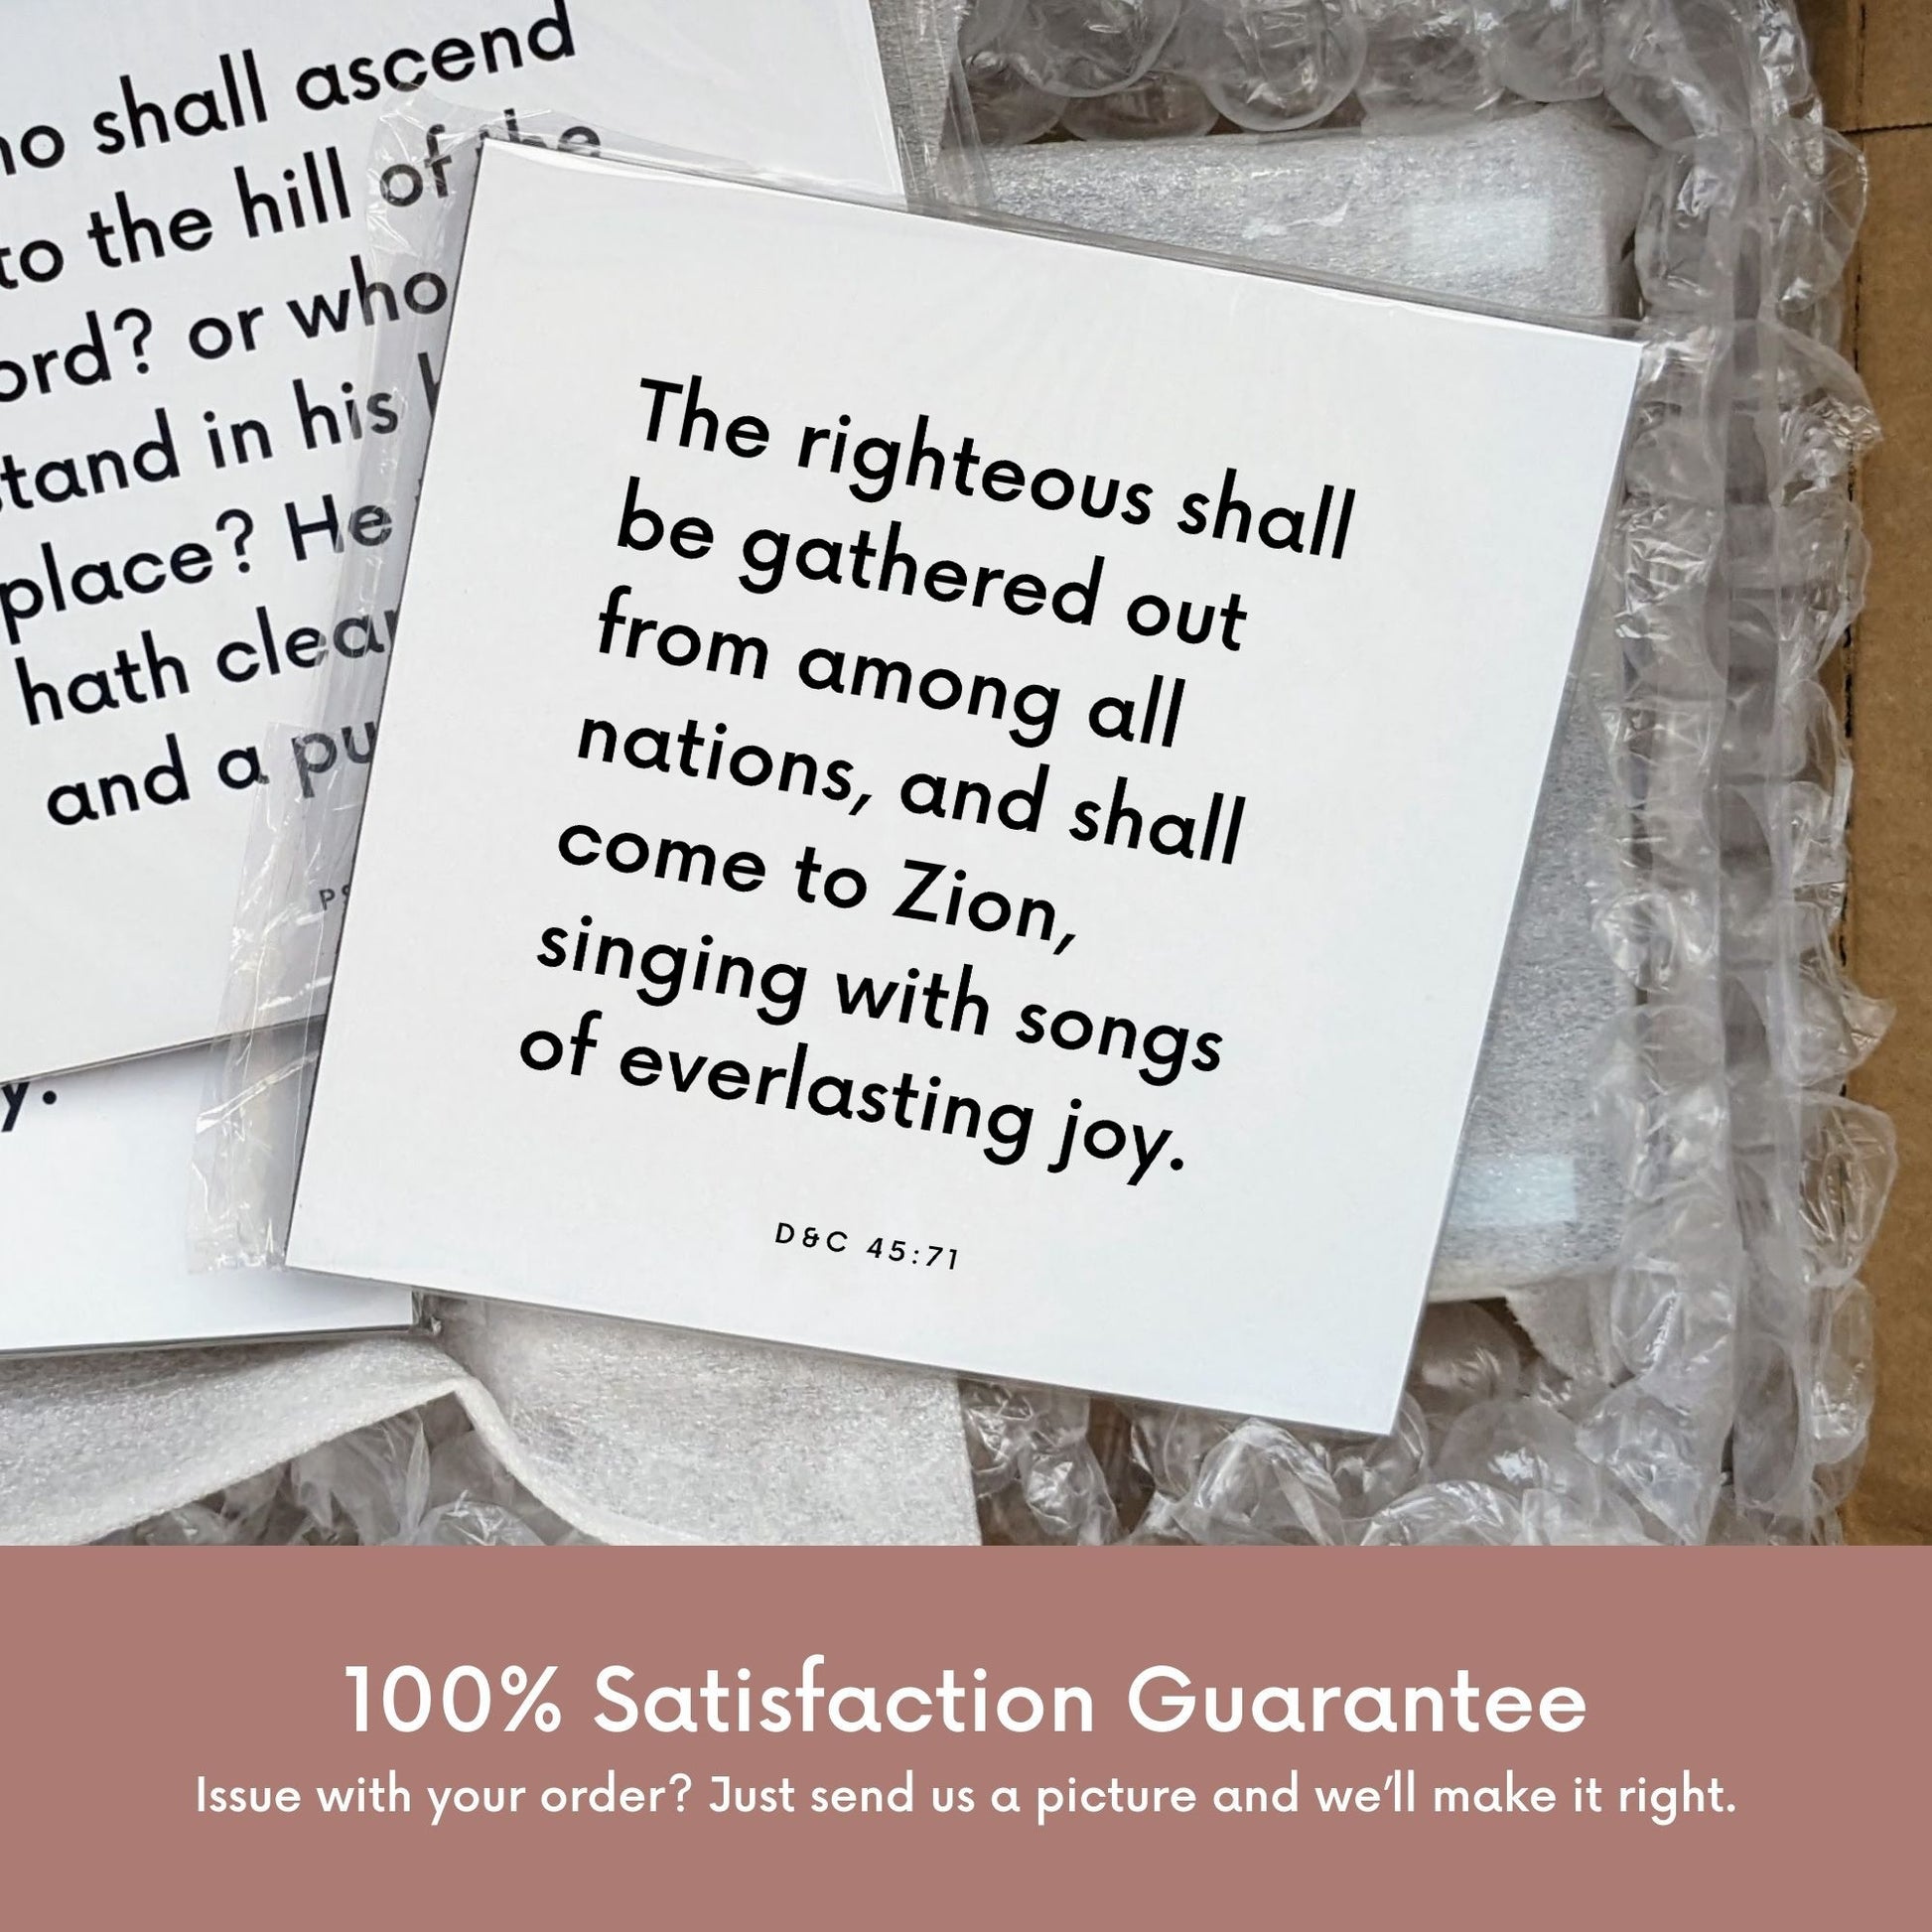 Shipping materials for scripture tile of D&C 45:71 - "The righteous shall be gathered out from among all nations"